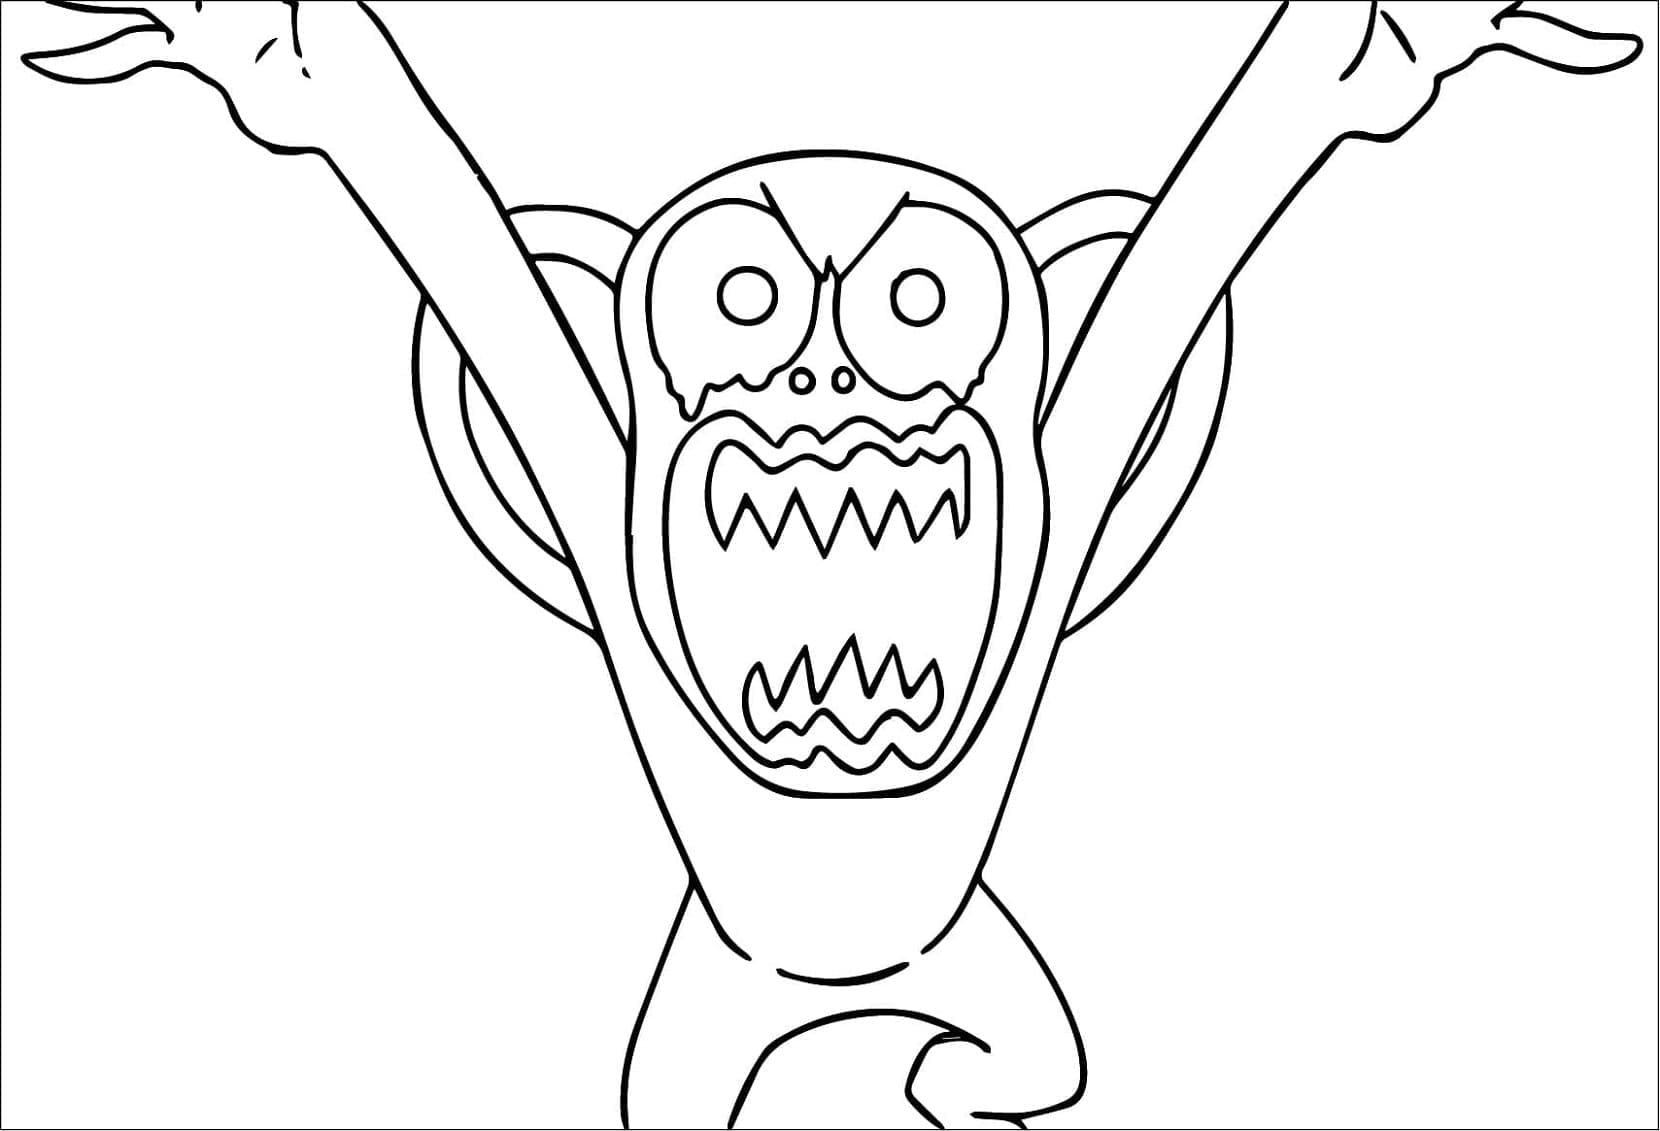 Printable Monster Monkey in Zoonomaly Coloring Page